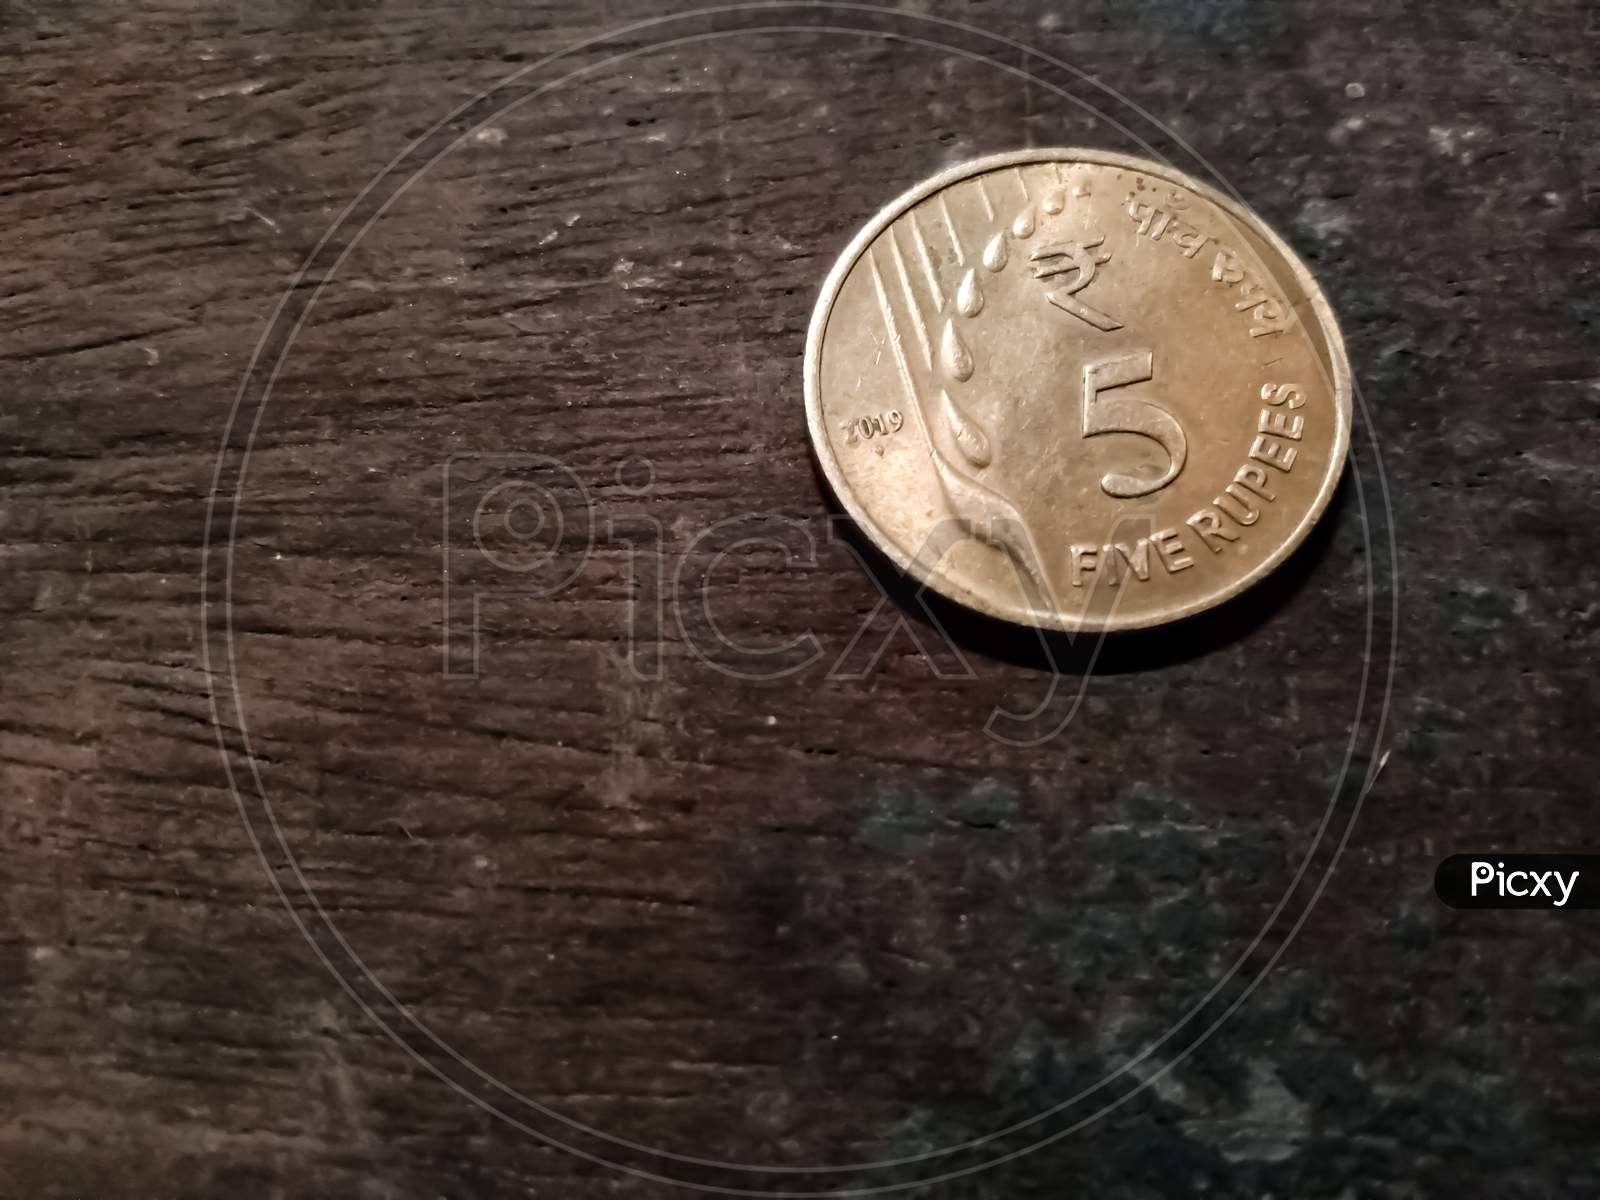 Five rupees coin